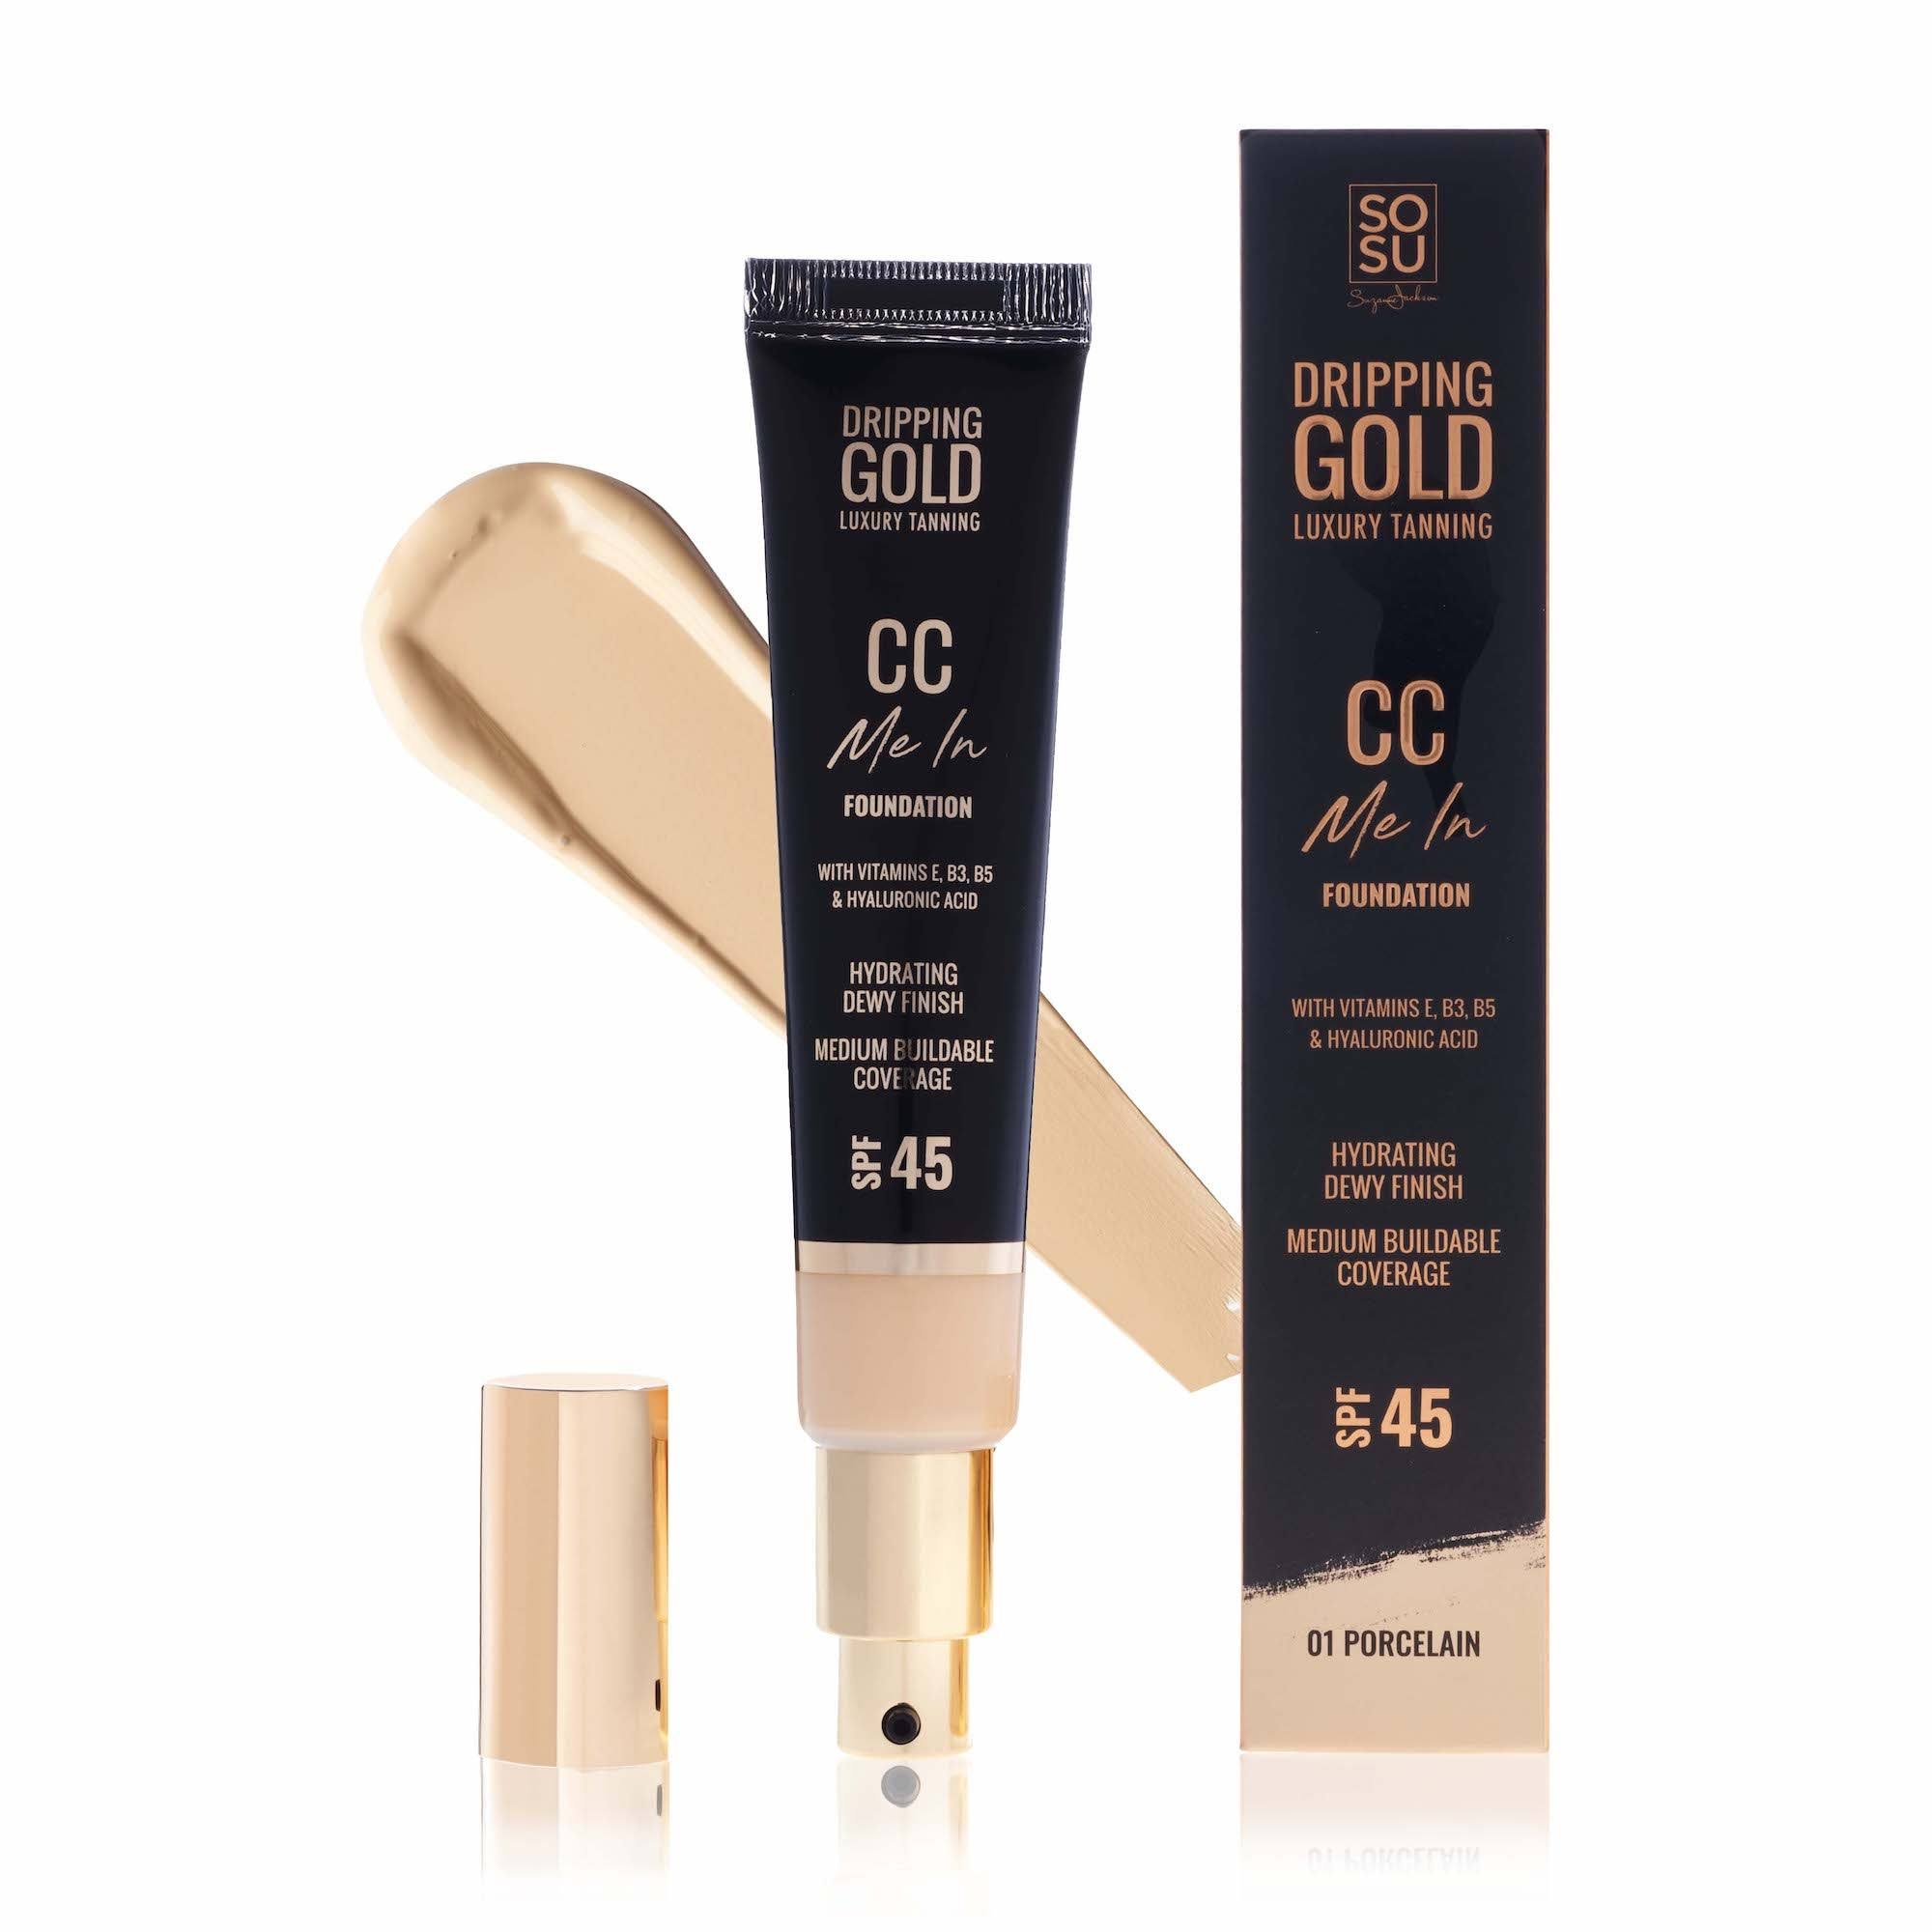 Dripping Gold CC Me in Foundation SPF4501 Porcelain